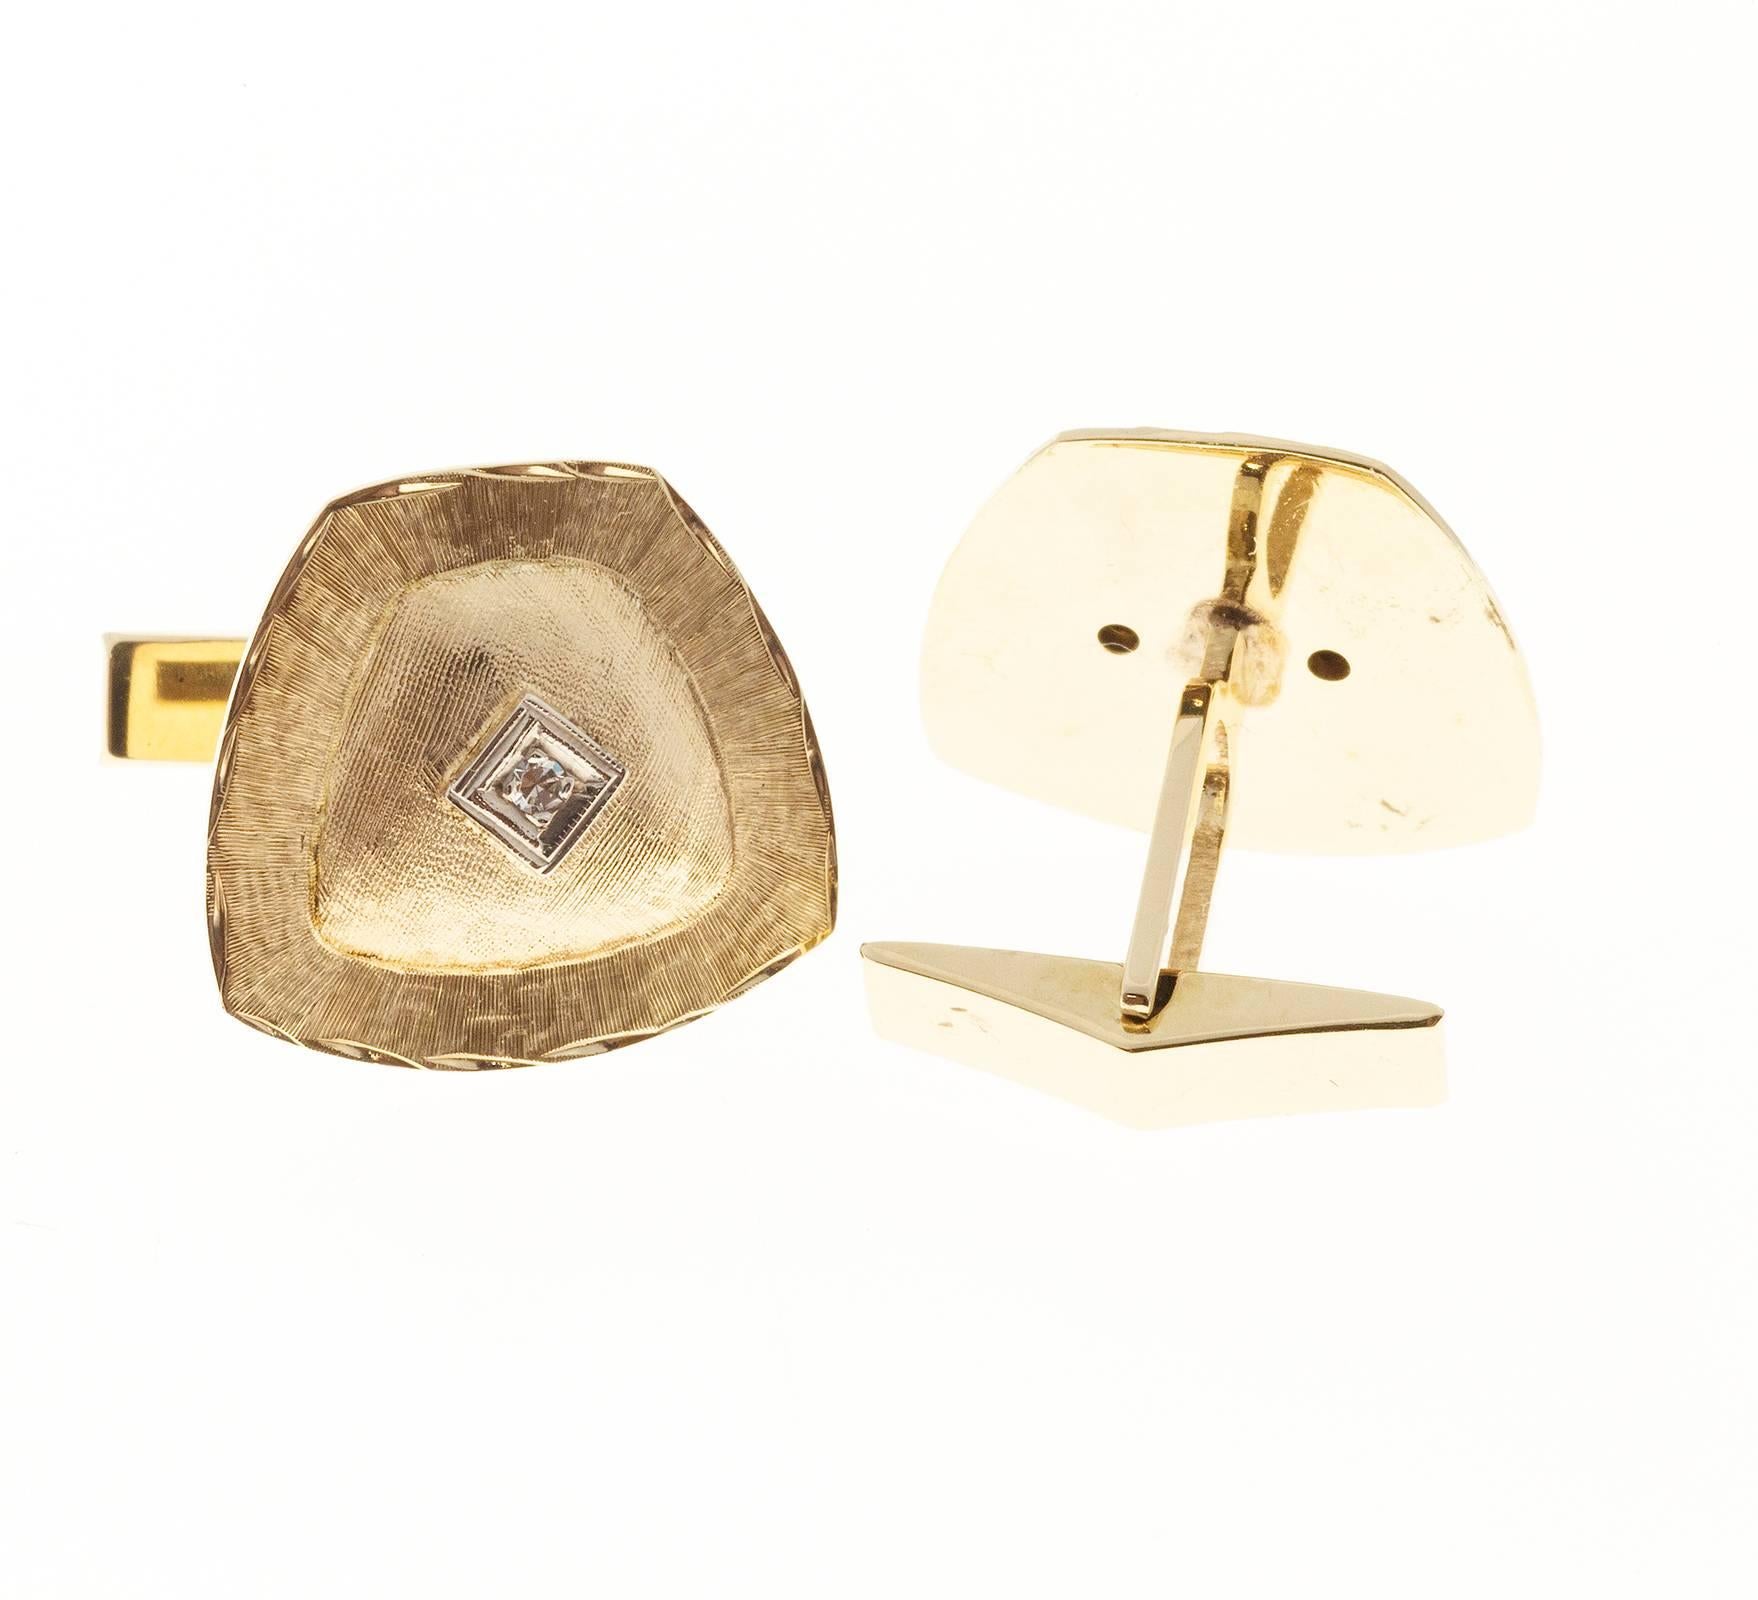 Diamond Hand Florentine shield shaped 14k gold cufflinks

2 single cut diamonds, approx. total weight .03cts, G, VS
14k Yellow Gold
9.8 grams
Depth: 4.78mm
Top to bottom: 18.5mm or .72 inch
Width: .77 inch or 19.5mm
